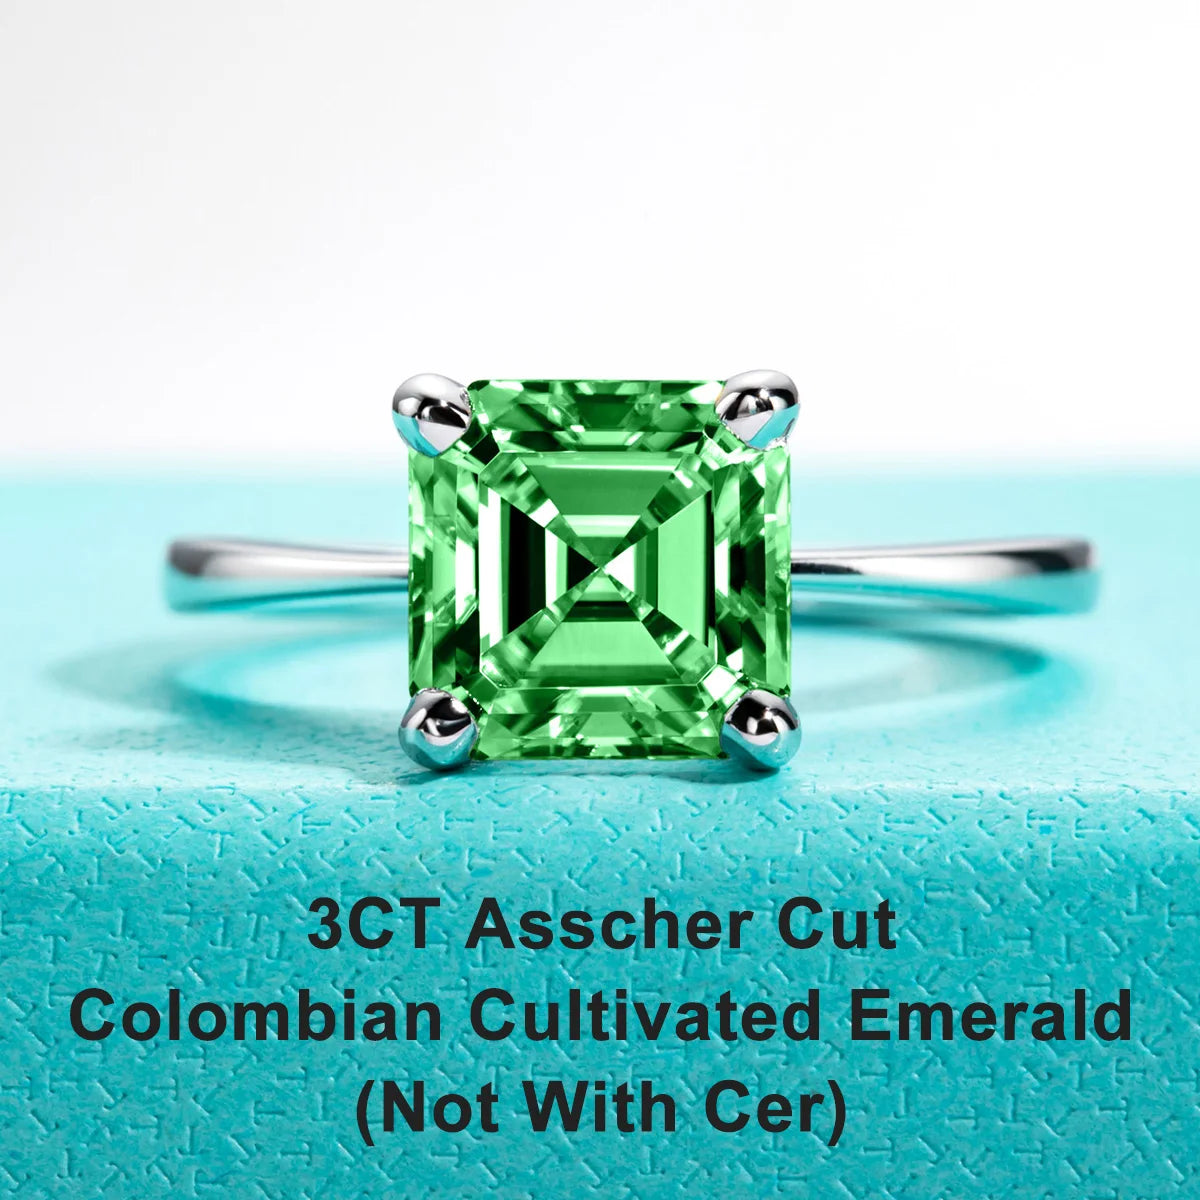 Emerald Engagement Rings. 3.0 Carat Colombian Lab-Grown Emerald.